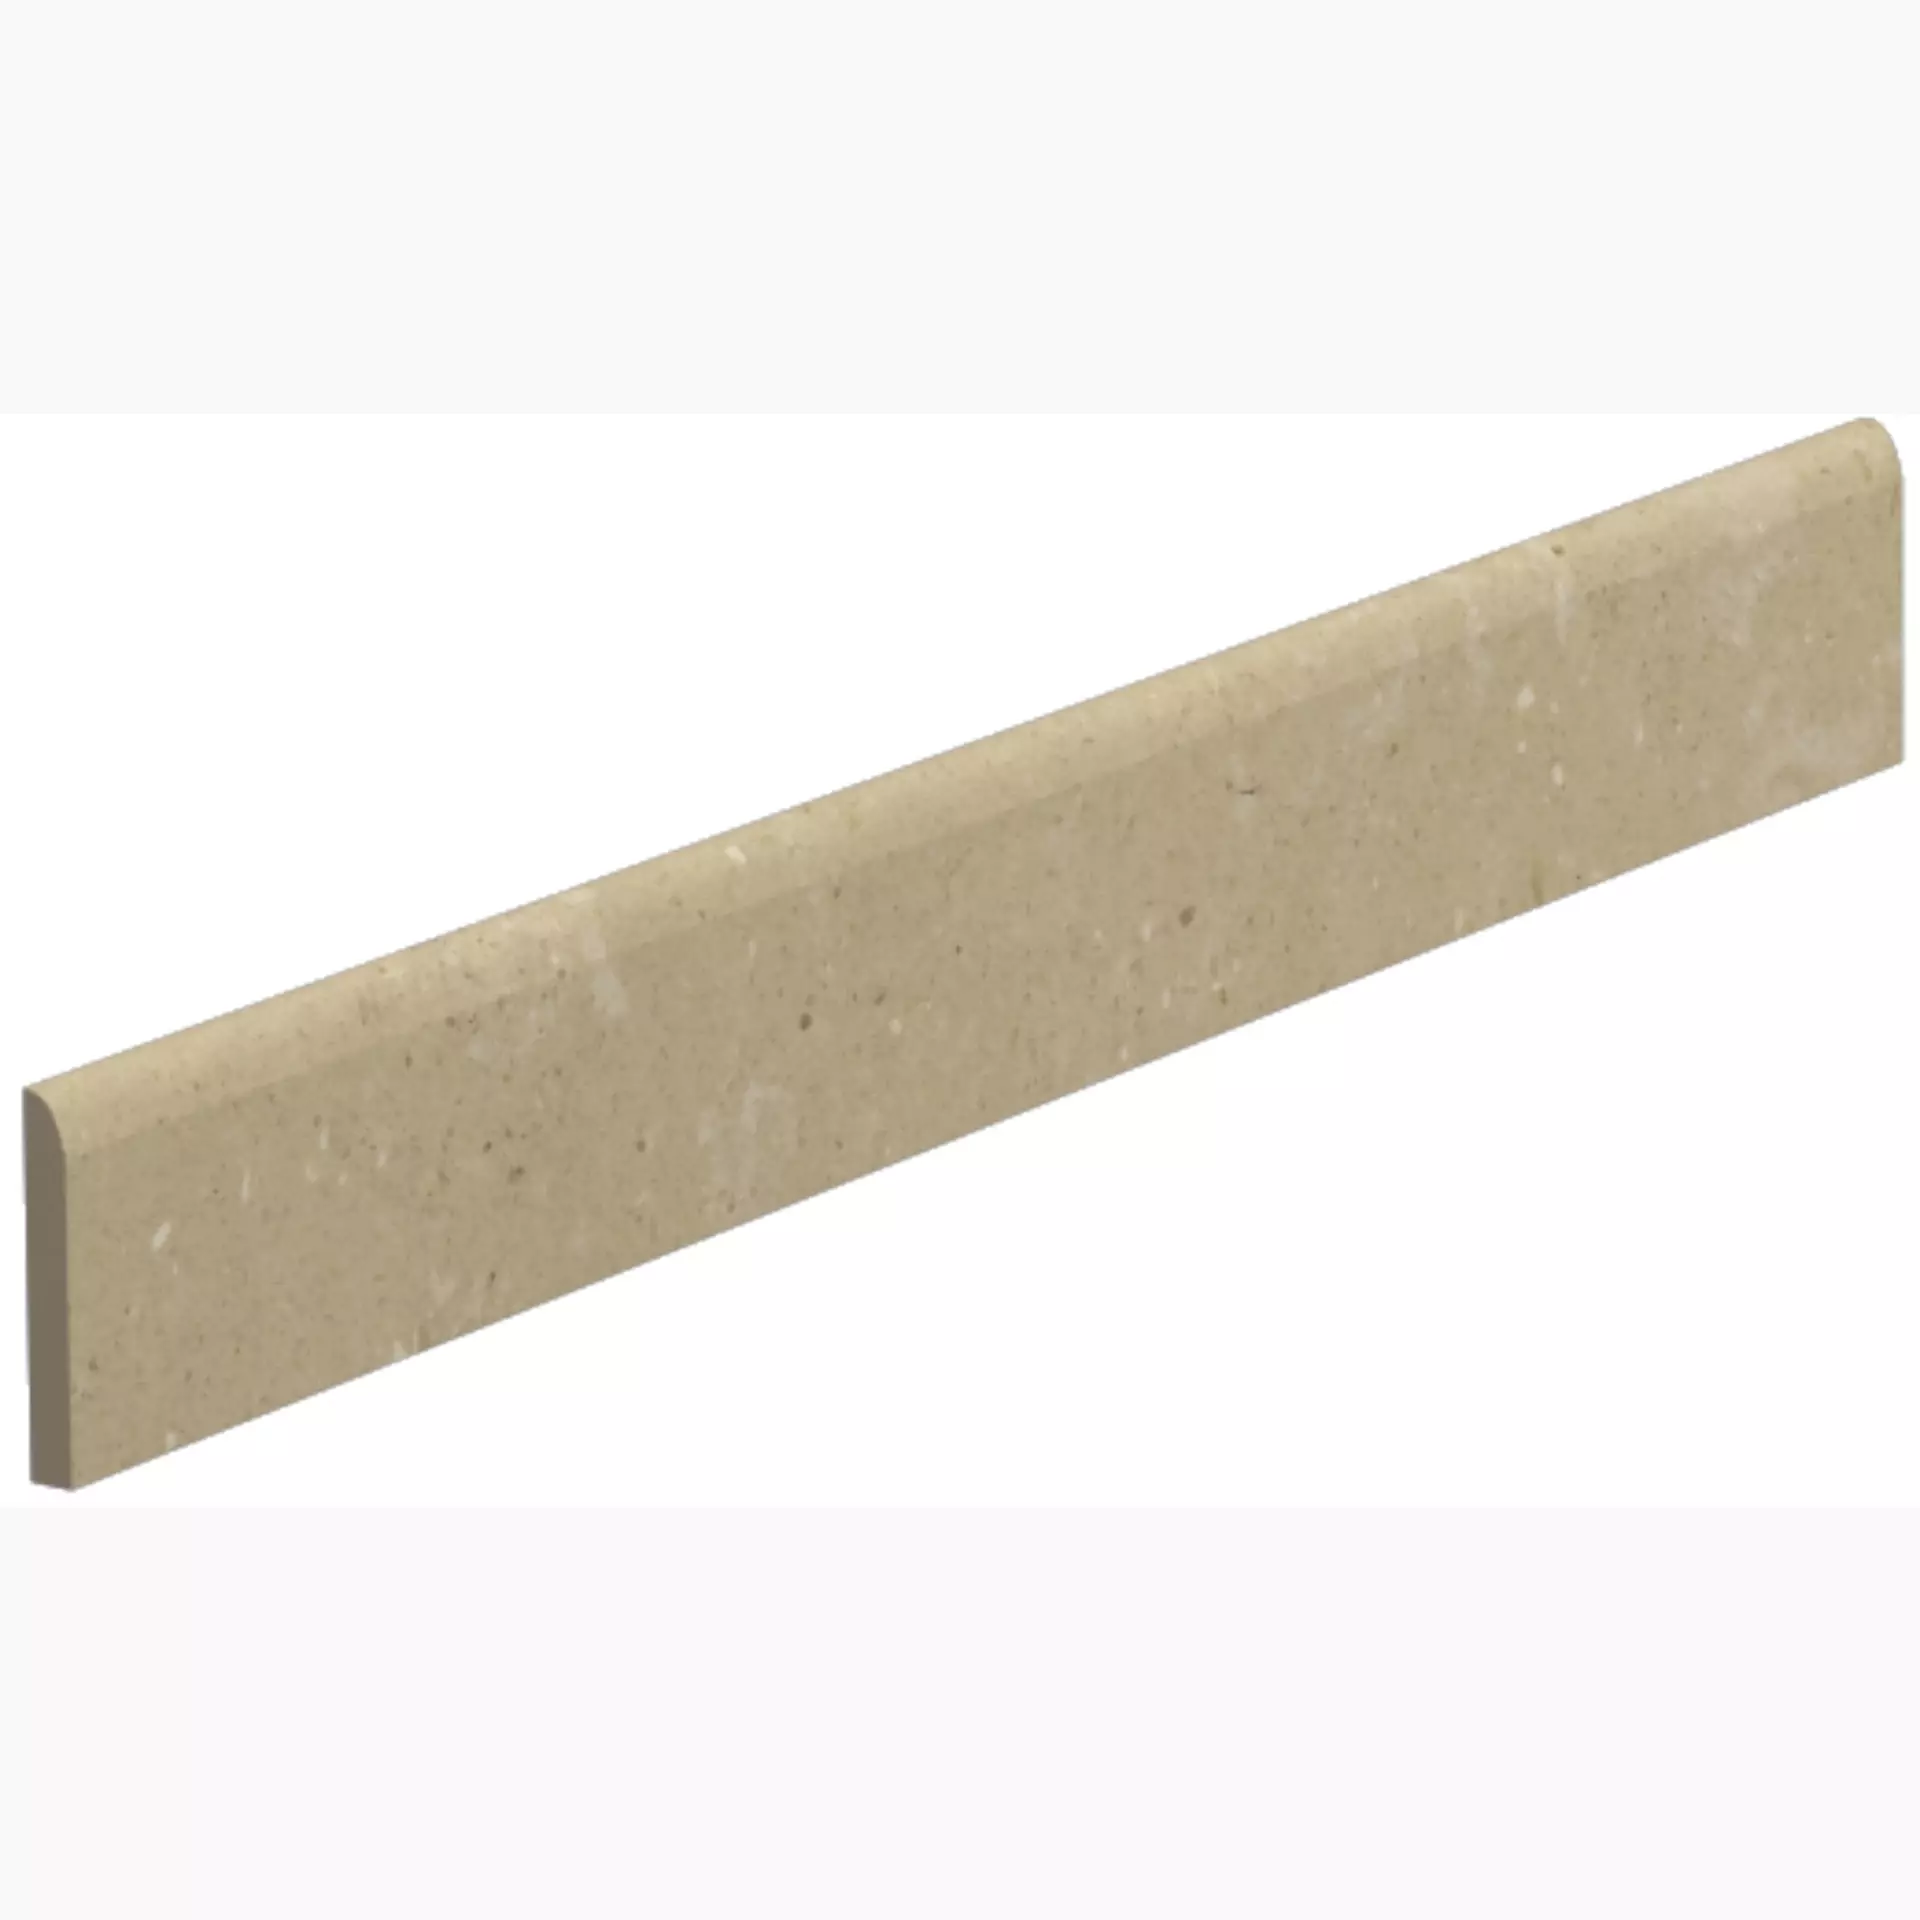 Del Conca Hwd Wild Beige Hwd01 Naturale Skirting board G0WD01R60 7,5x60cm rectified 8,5mm